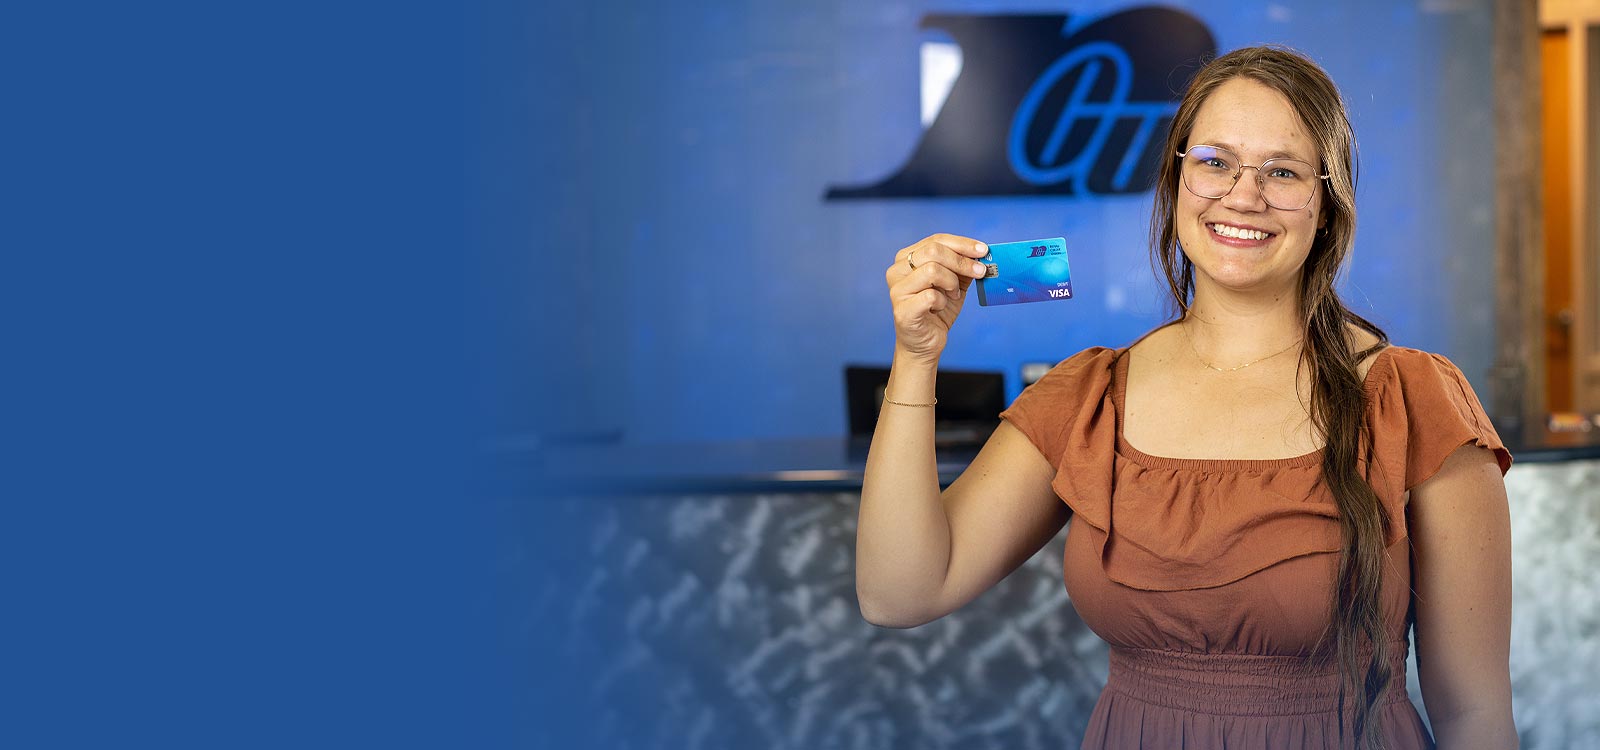 Woman holding a debit card and smiling